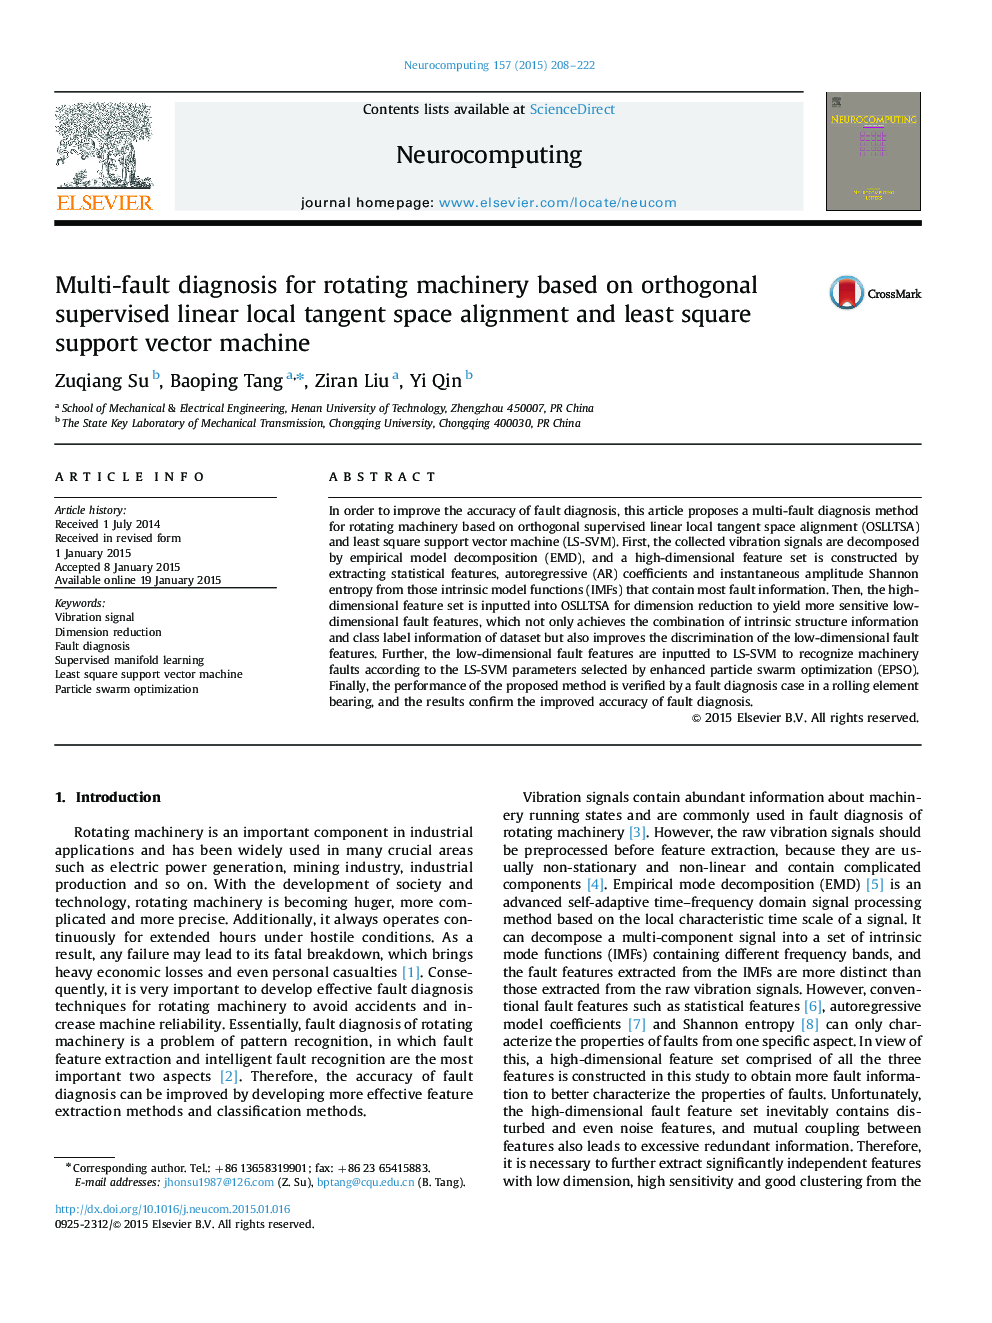 Multi-fault diagnosis for rotating machinery based on orthogonal supervised linear local tangent space alignment and least square support vector machine